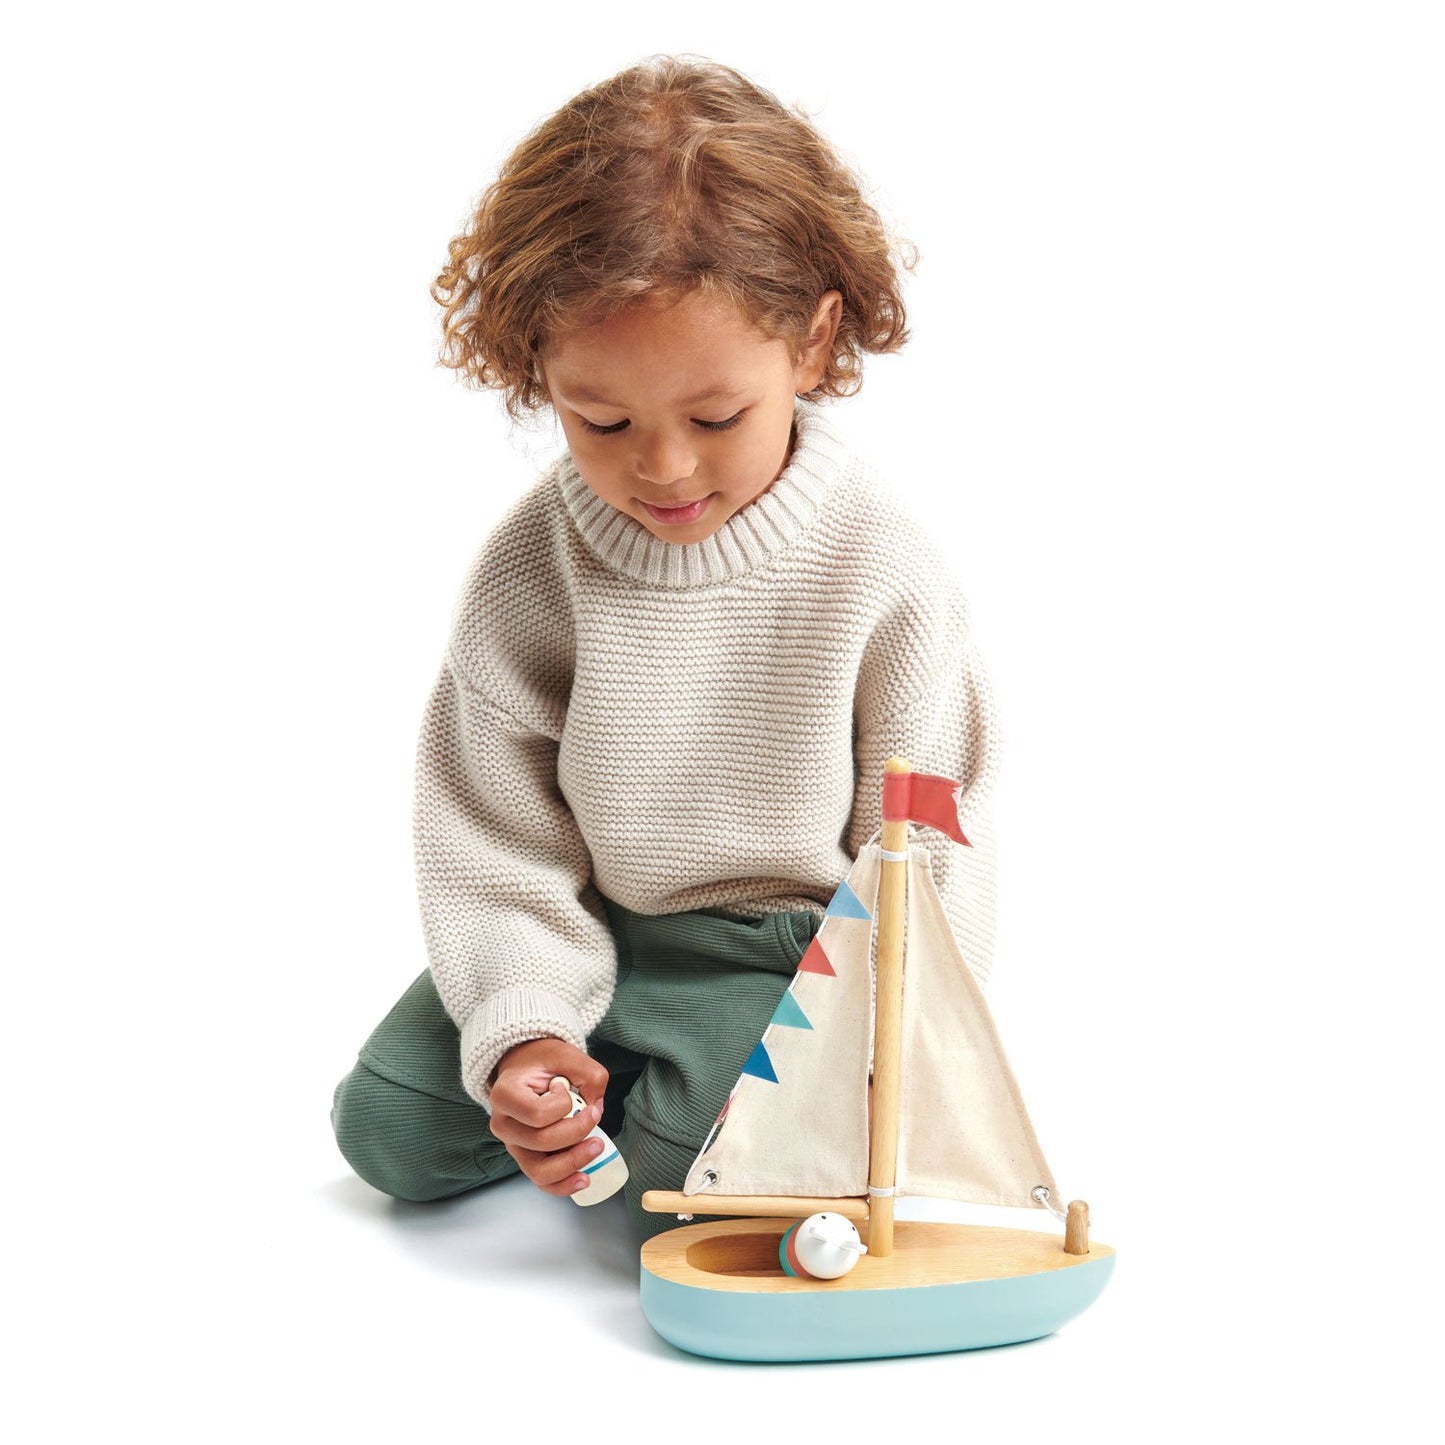 Wood Toy - Sailaway Boat